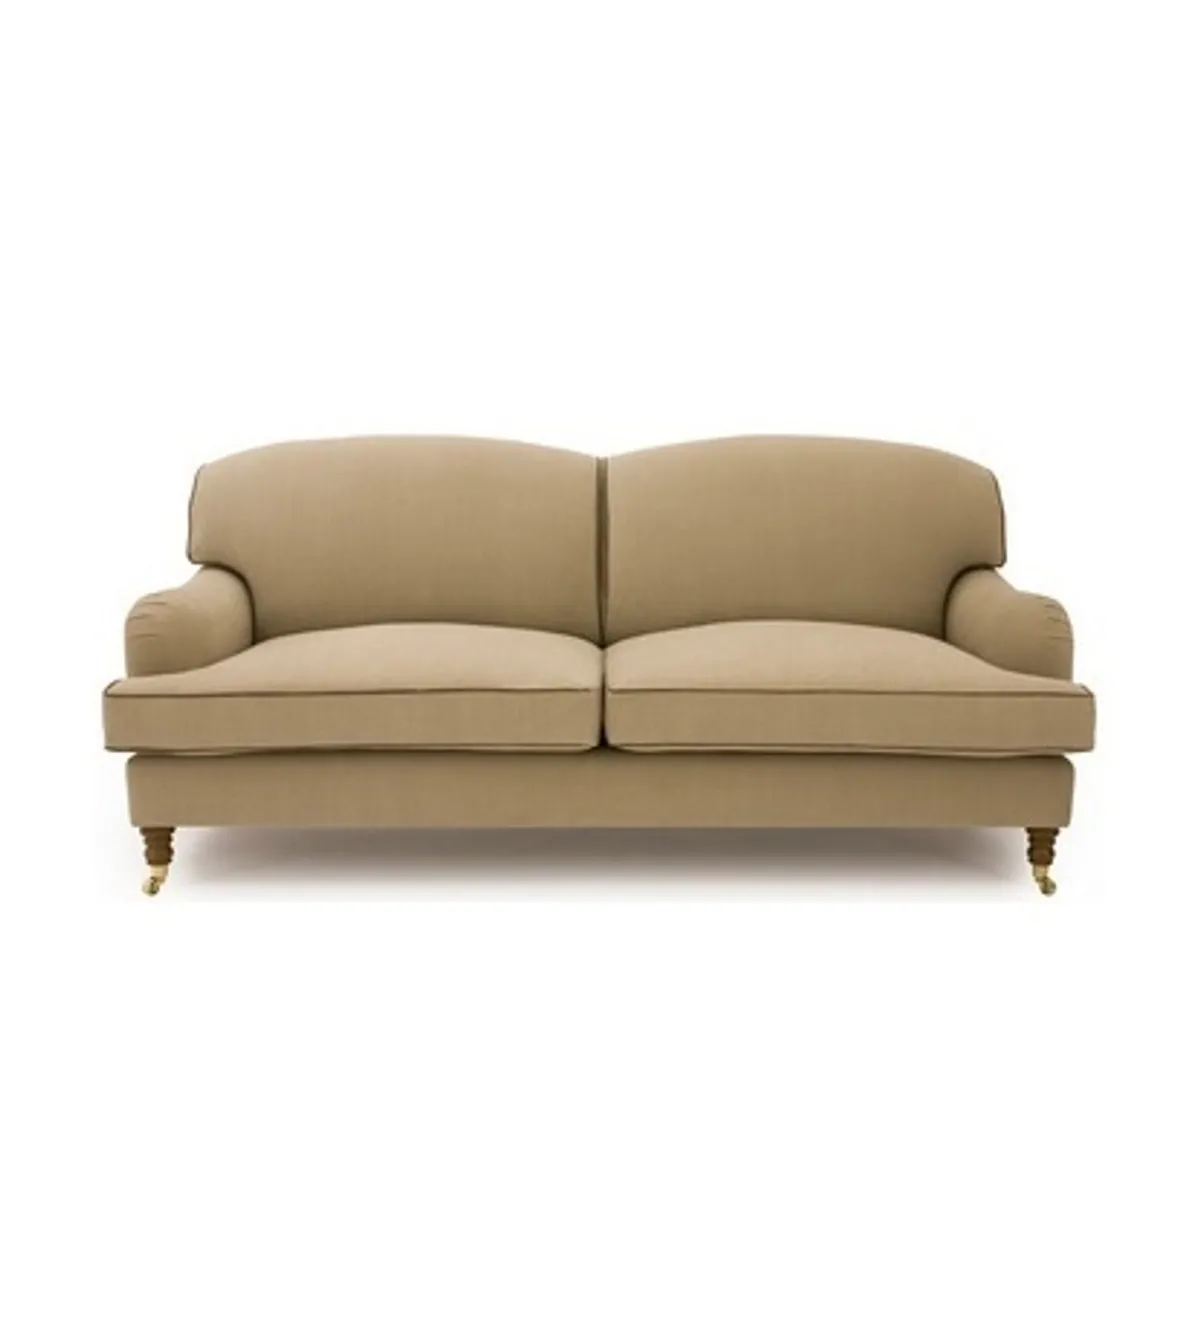 Rhone Sofa By Inside Out Contracts